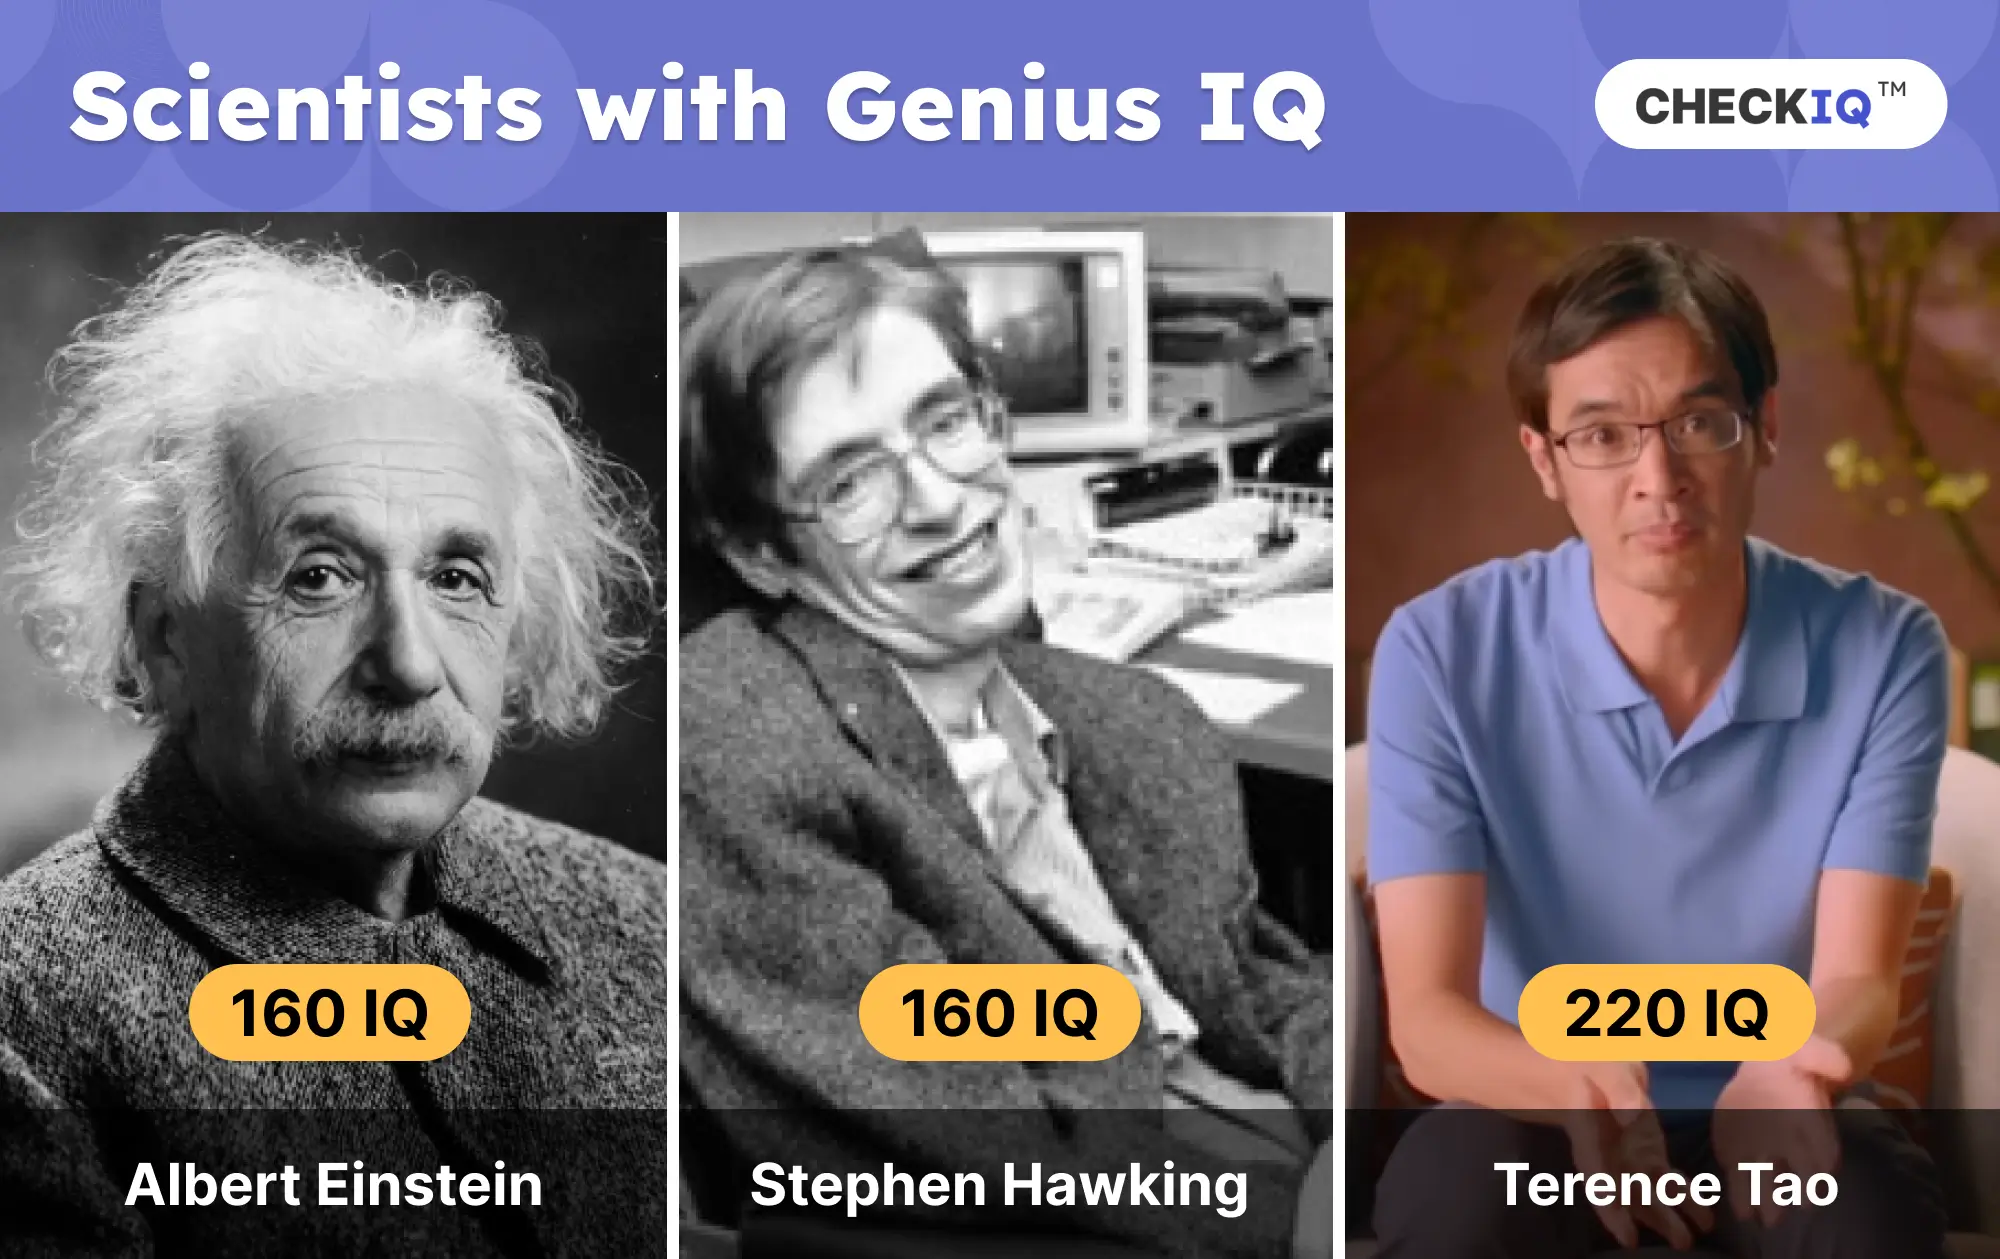 Scientists with genius IQ score examples: Albert Einstein, Stephen Hawking, and Terence Tao